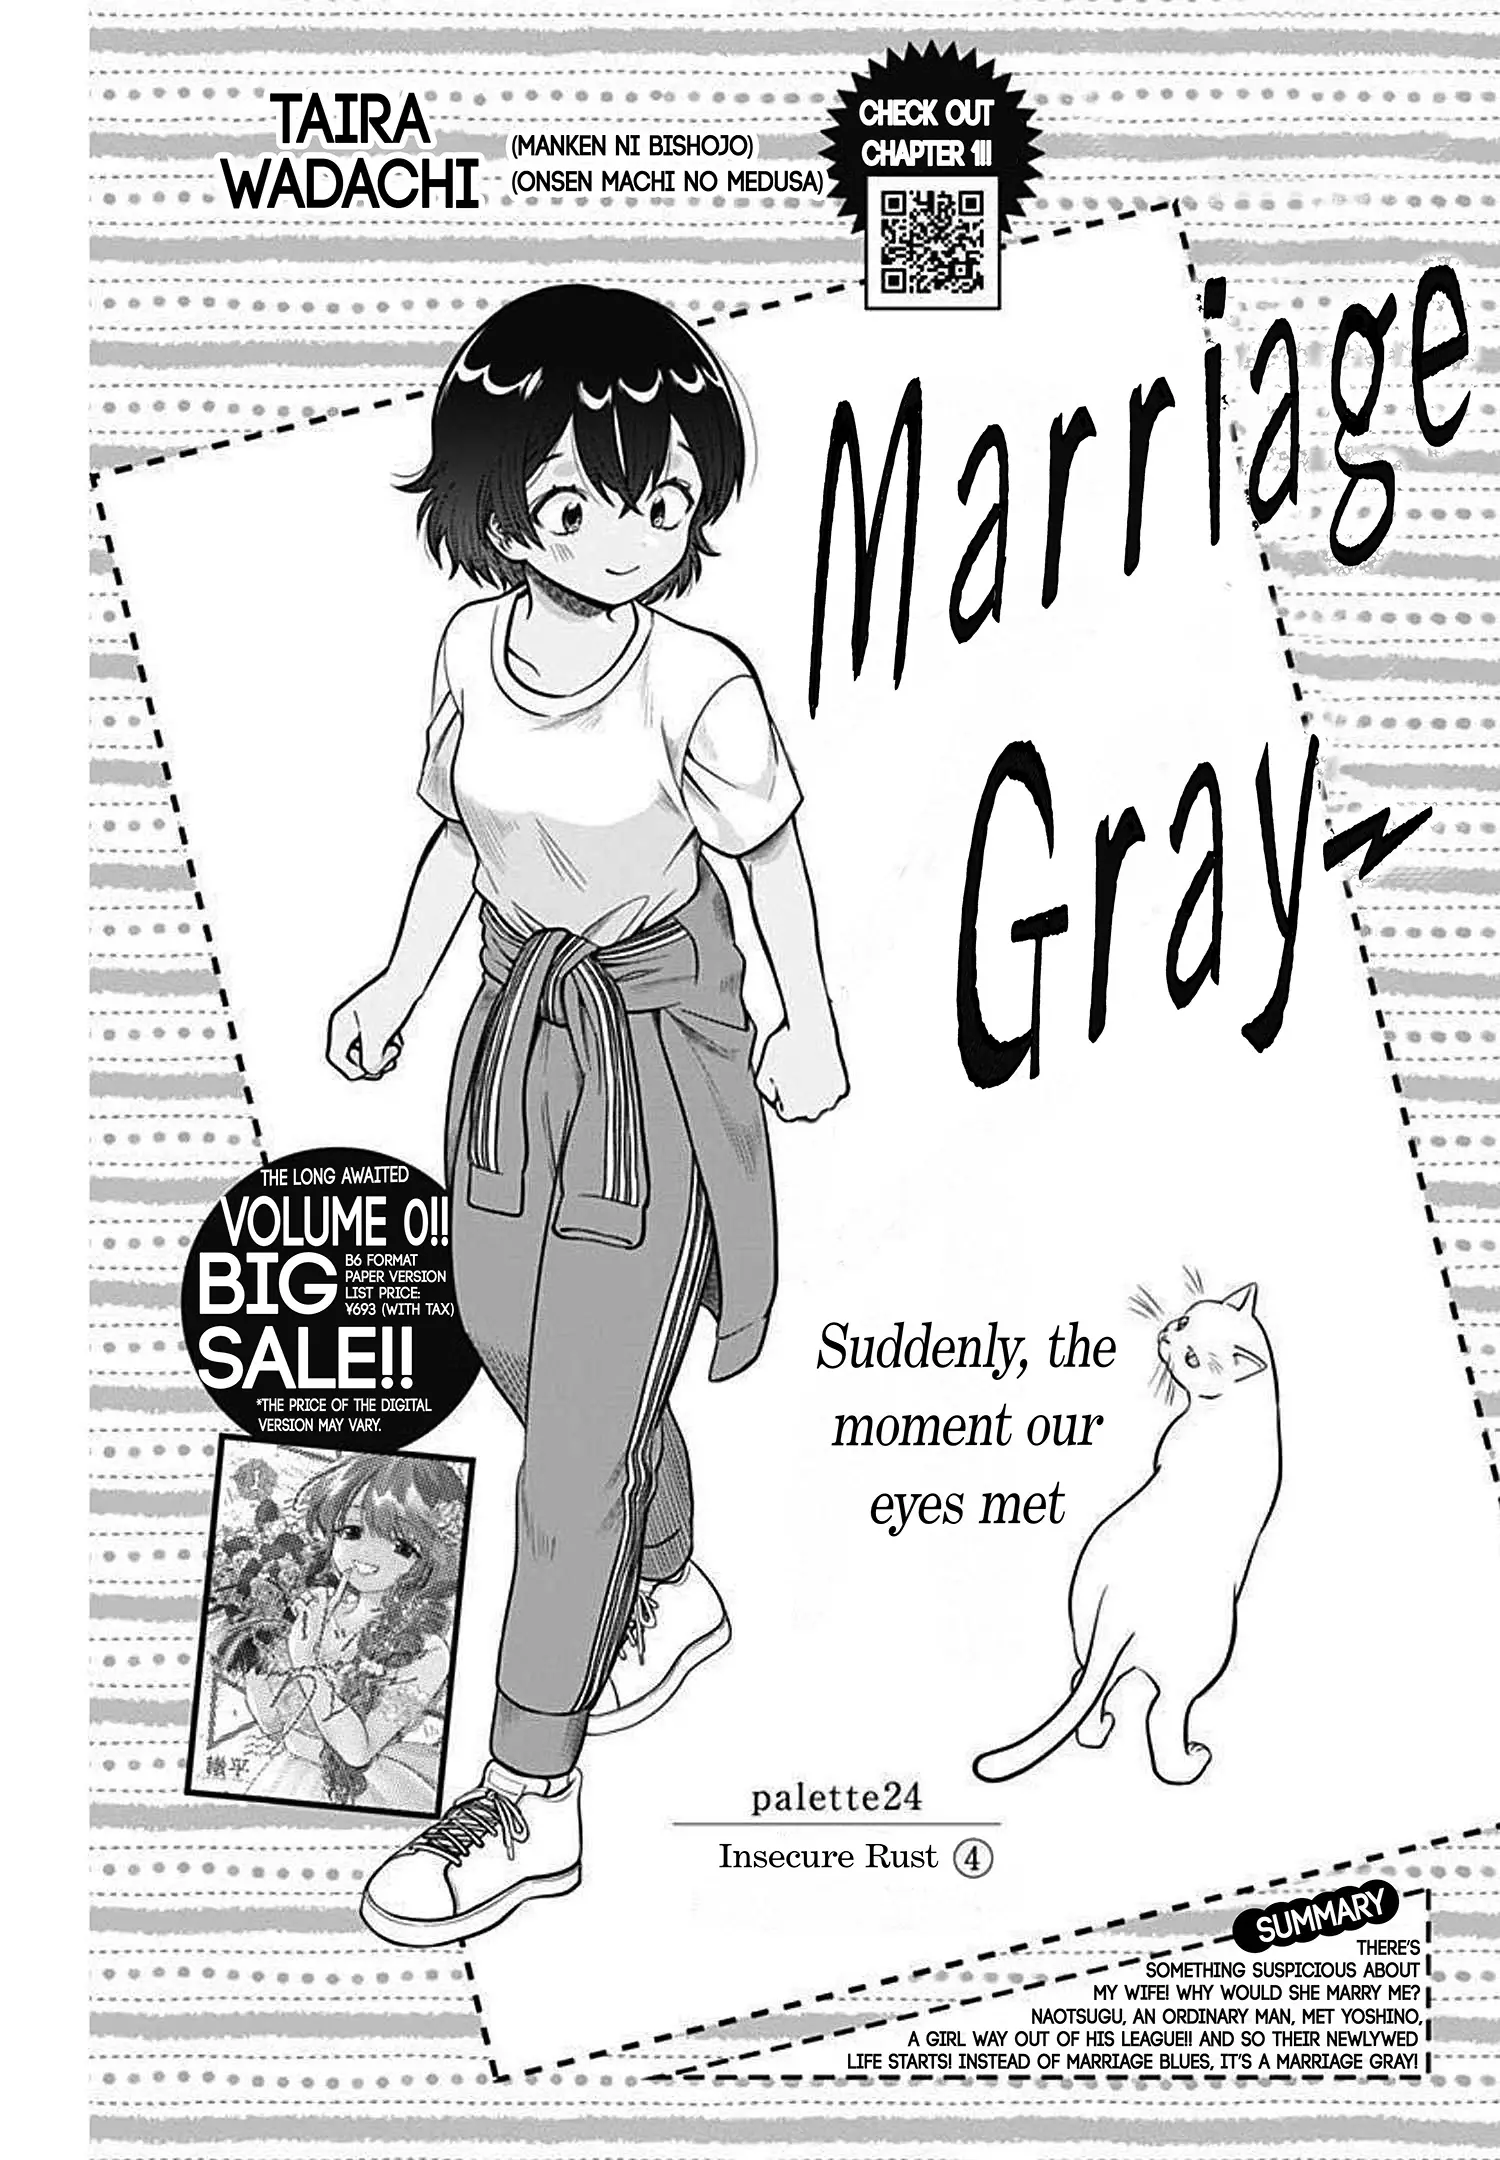 Marriage Gray - 24 page 1-46fd30b2